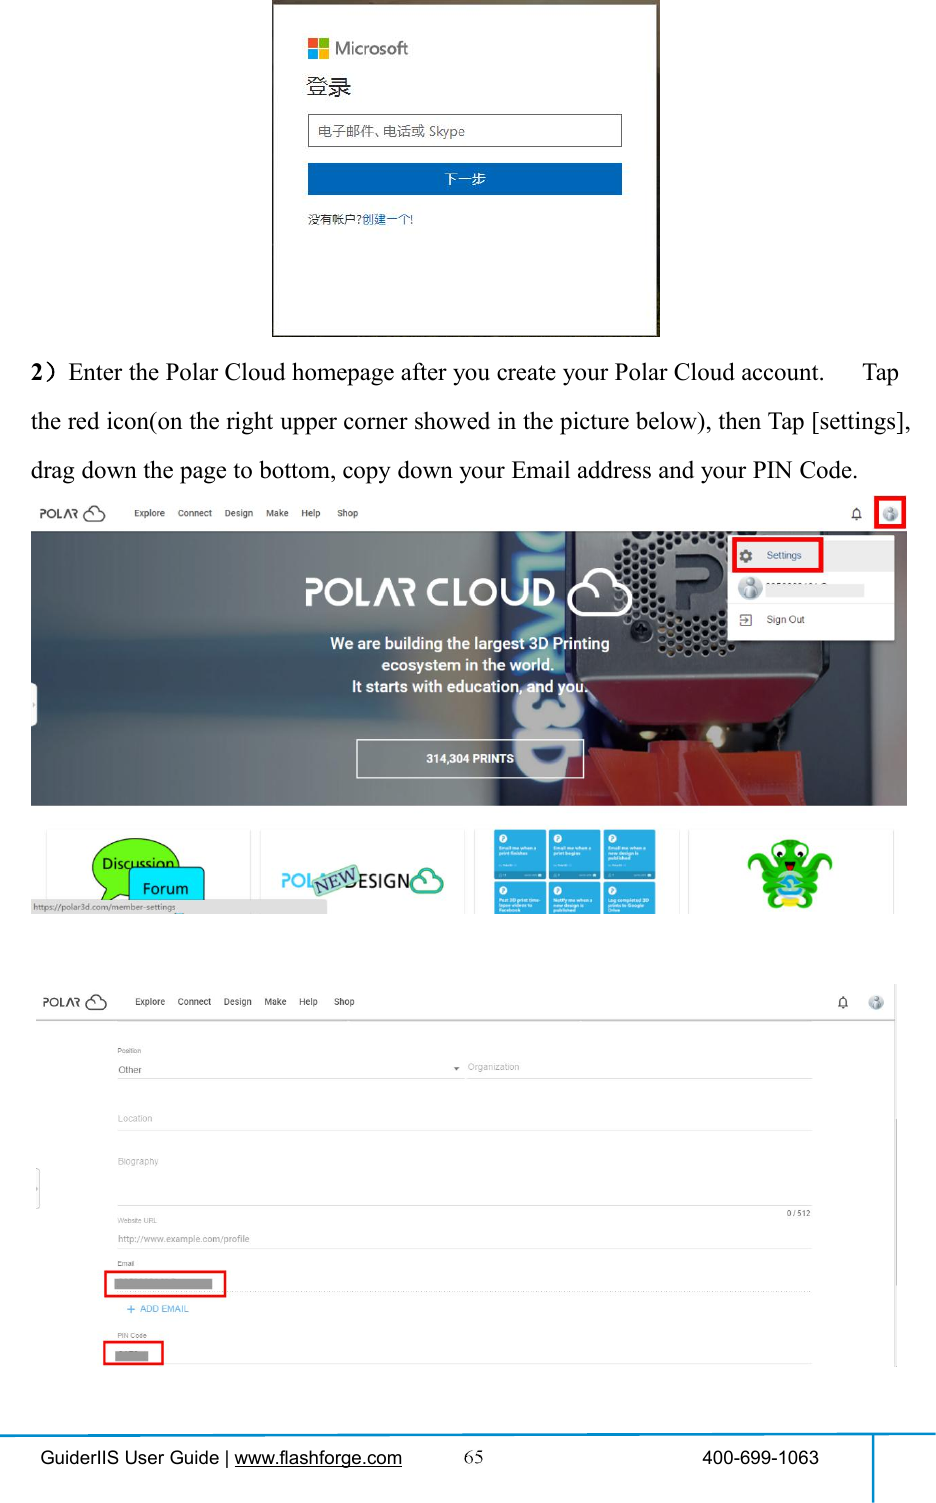 GuiderIIS User Guide | www.flashforge.com 400-699-10632）Enter the Polar Cloud homepage after you create your Polar Cloud account. Tapthe red icon(on the right upper corner showed in the picture below), then Tap [settings],drag down the page to bottom, copy down your Email address and your PIN Code.